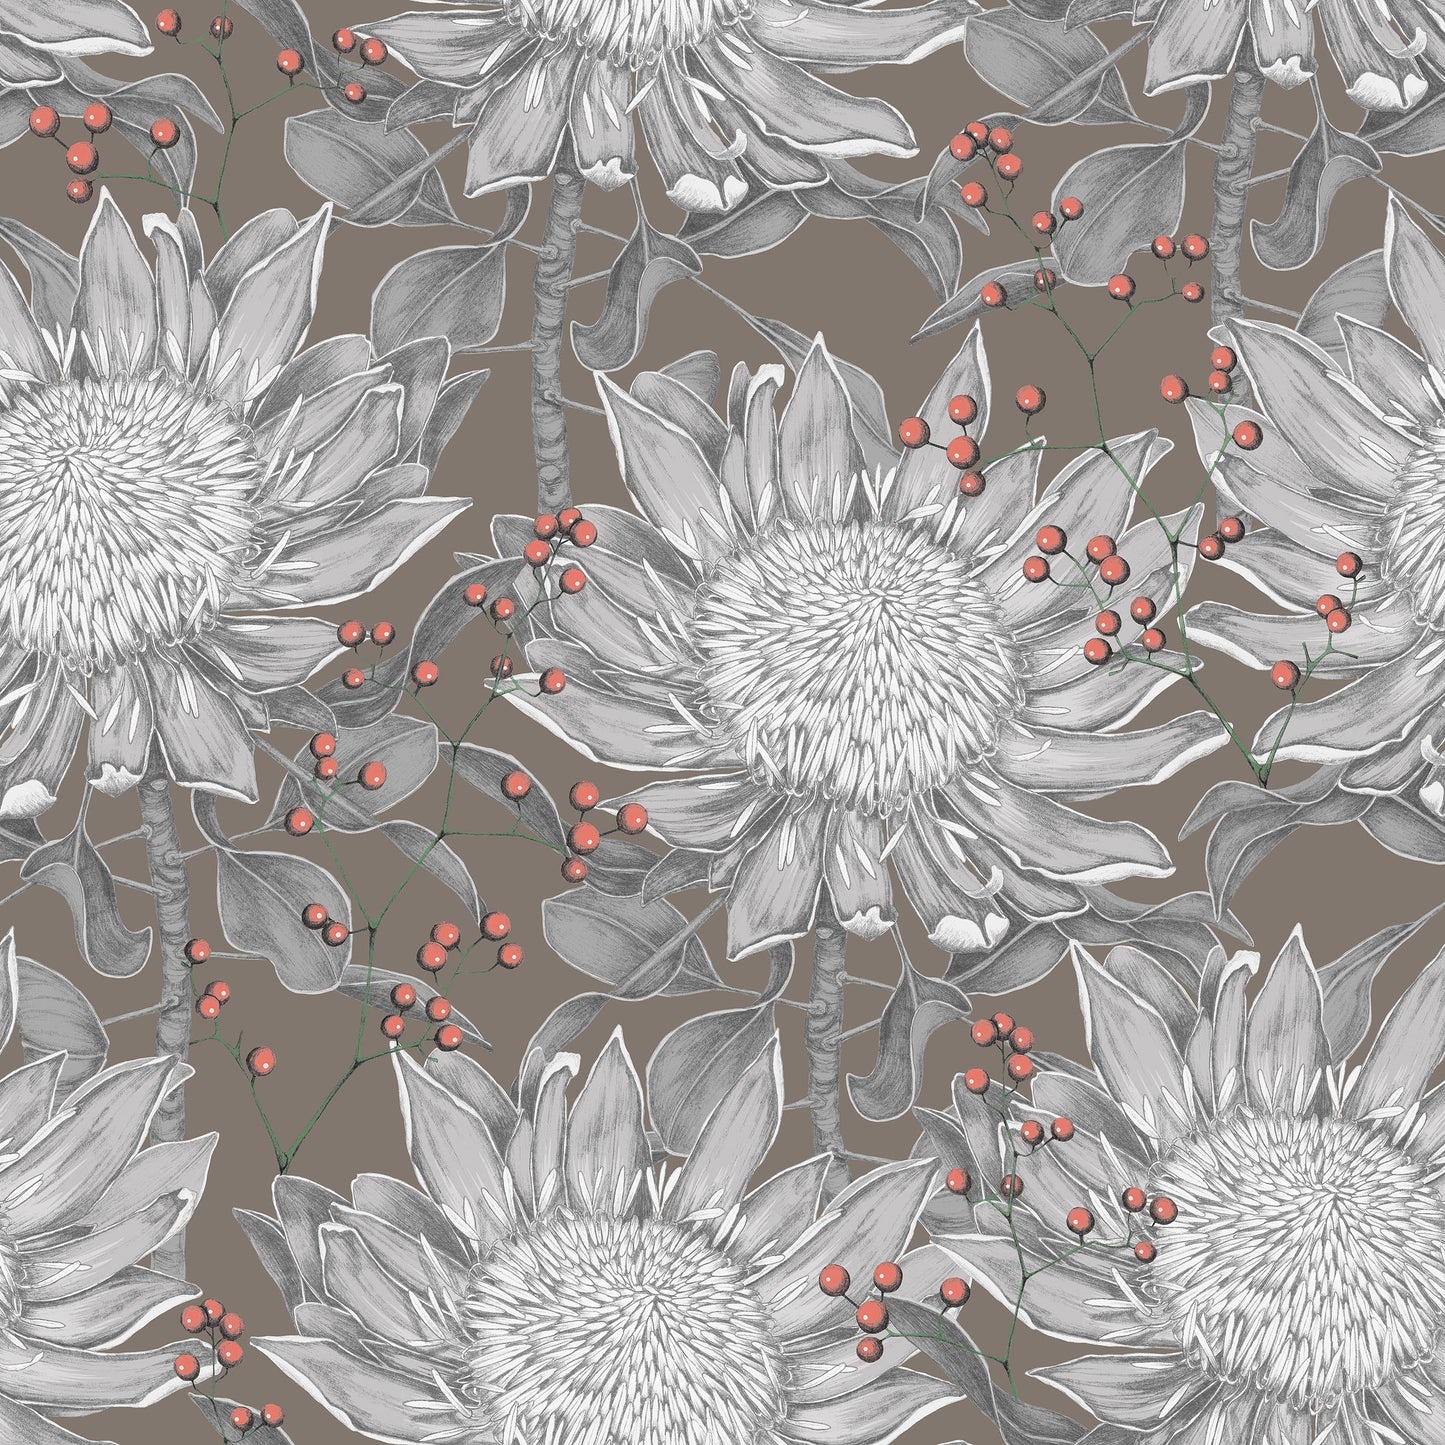 Whimsical white and grey/gray sunflower pattern wild berry design on brown background easy to install and remove peel and stick custom wallpaper available in different lengths/sizes locally created and printed in Canada wallpaper. Washable, durable, commercial grade, removable and waterproof.